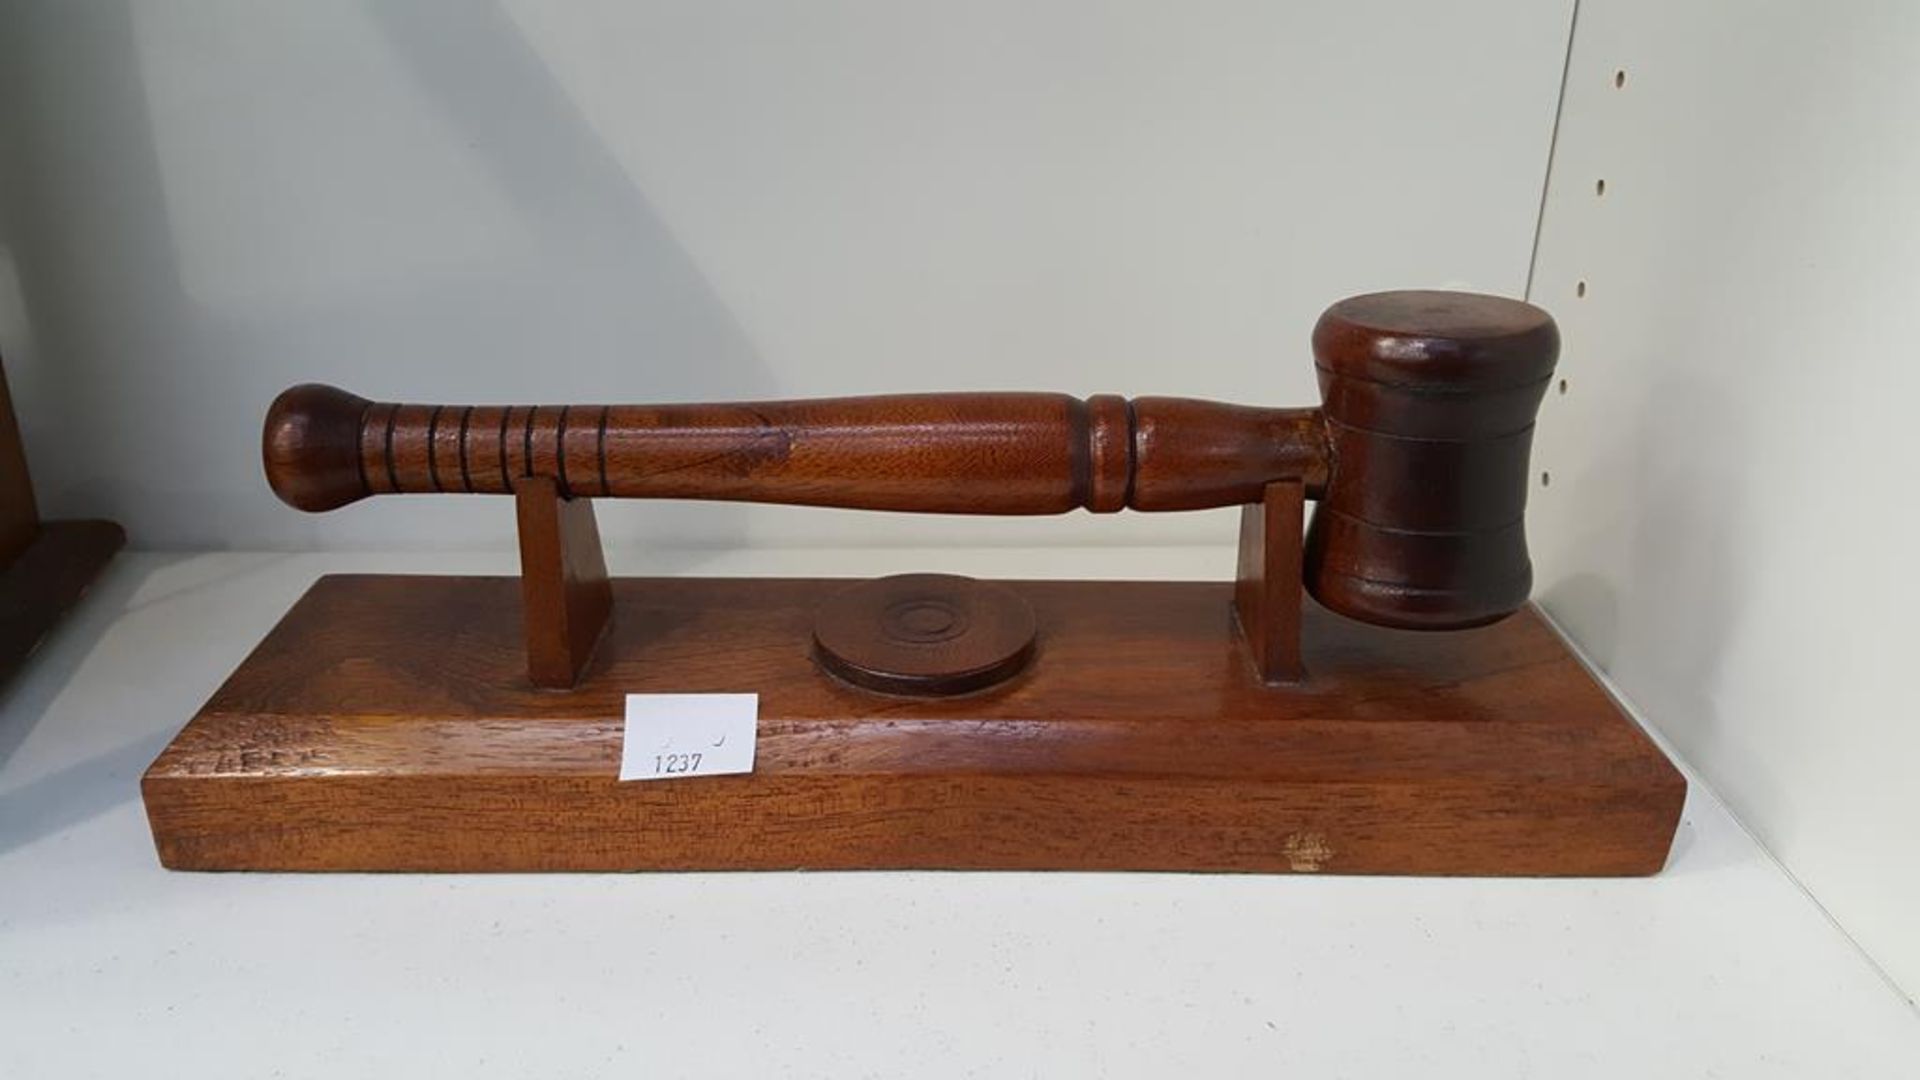 A Wooden Gavel and Base/Stand (est £20-£30)